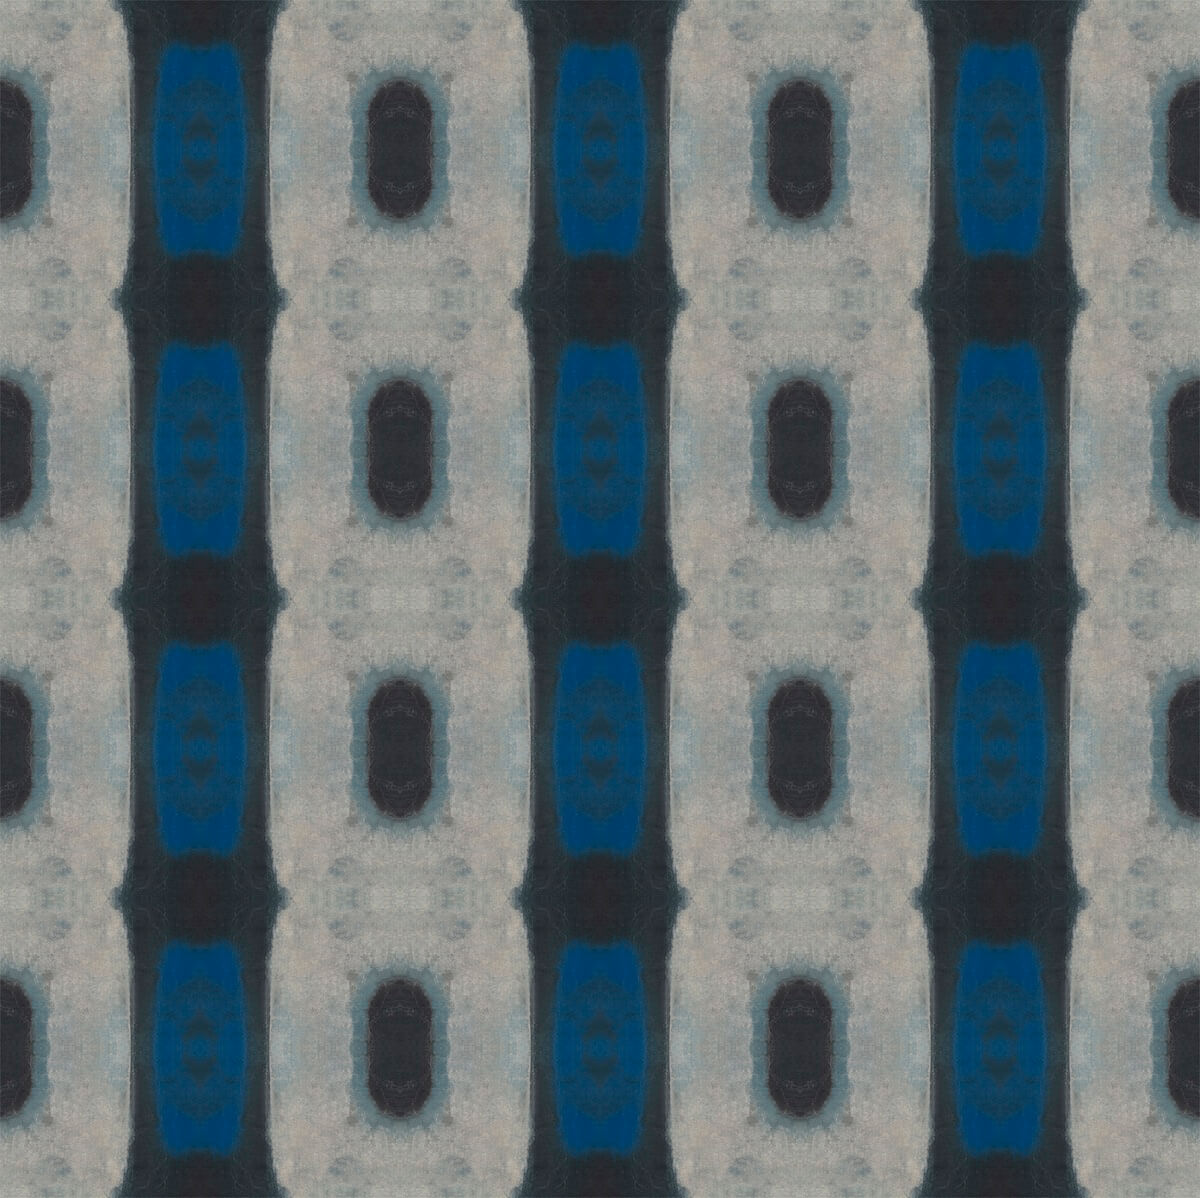 Solitude II pattern in blue, gray and black